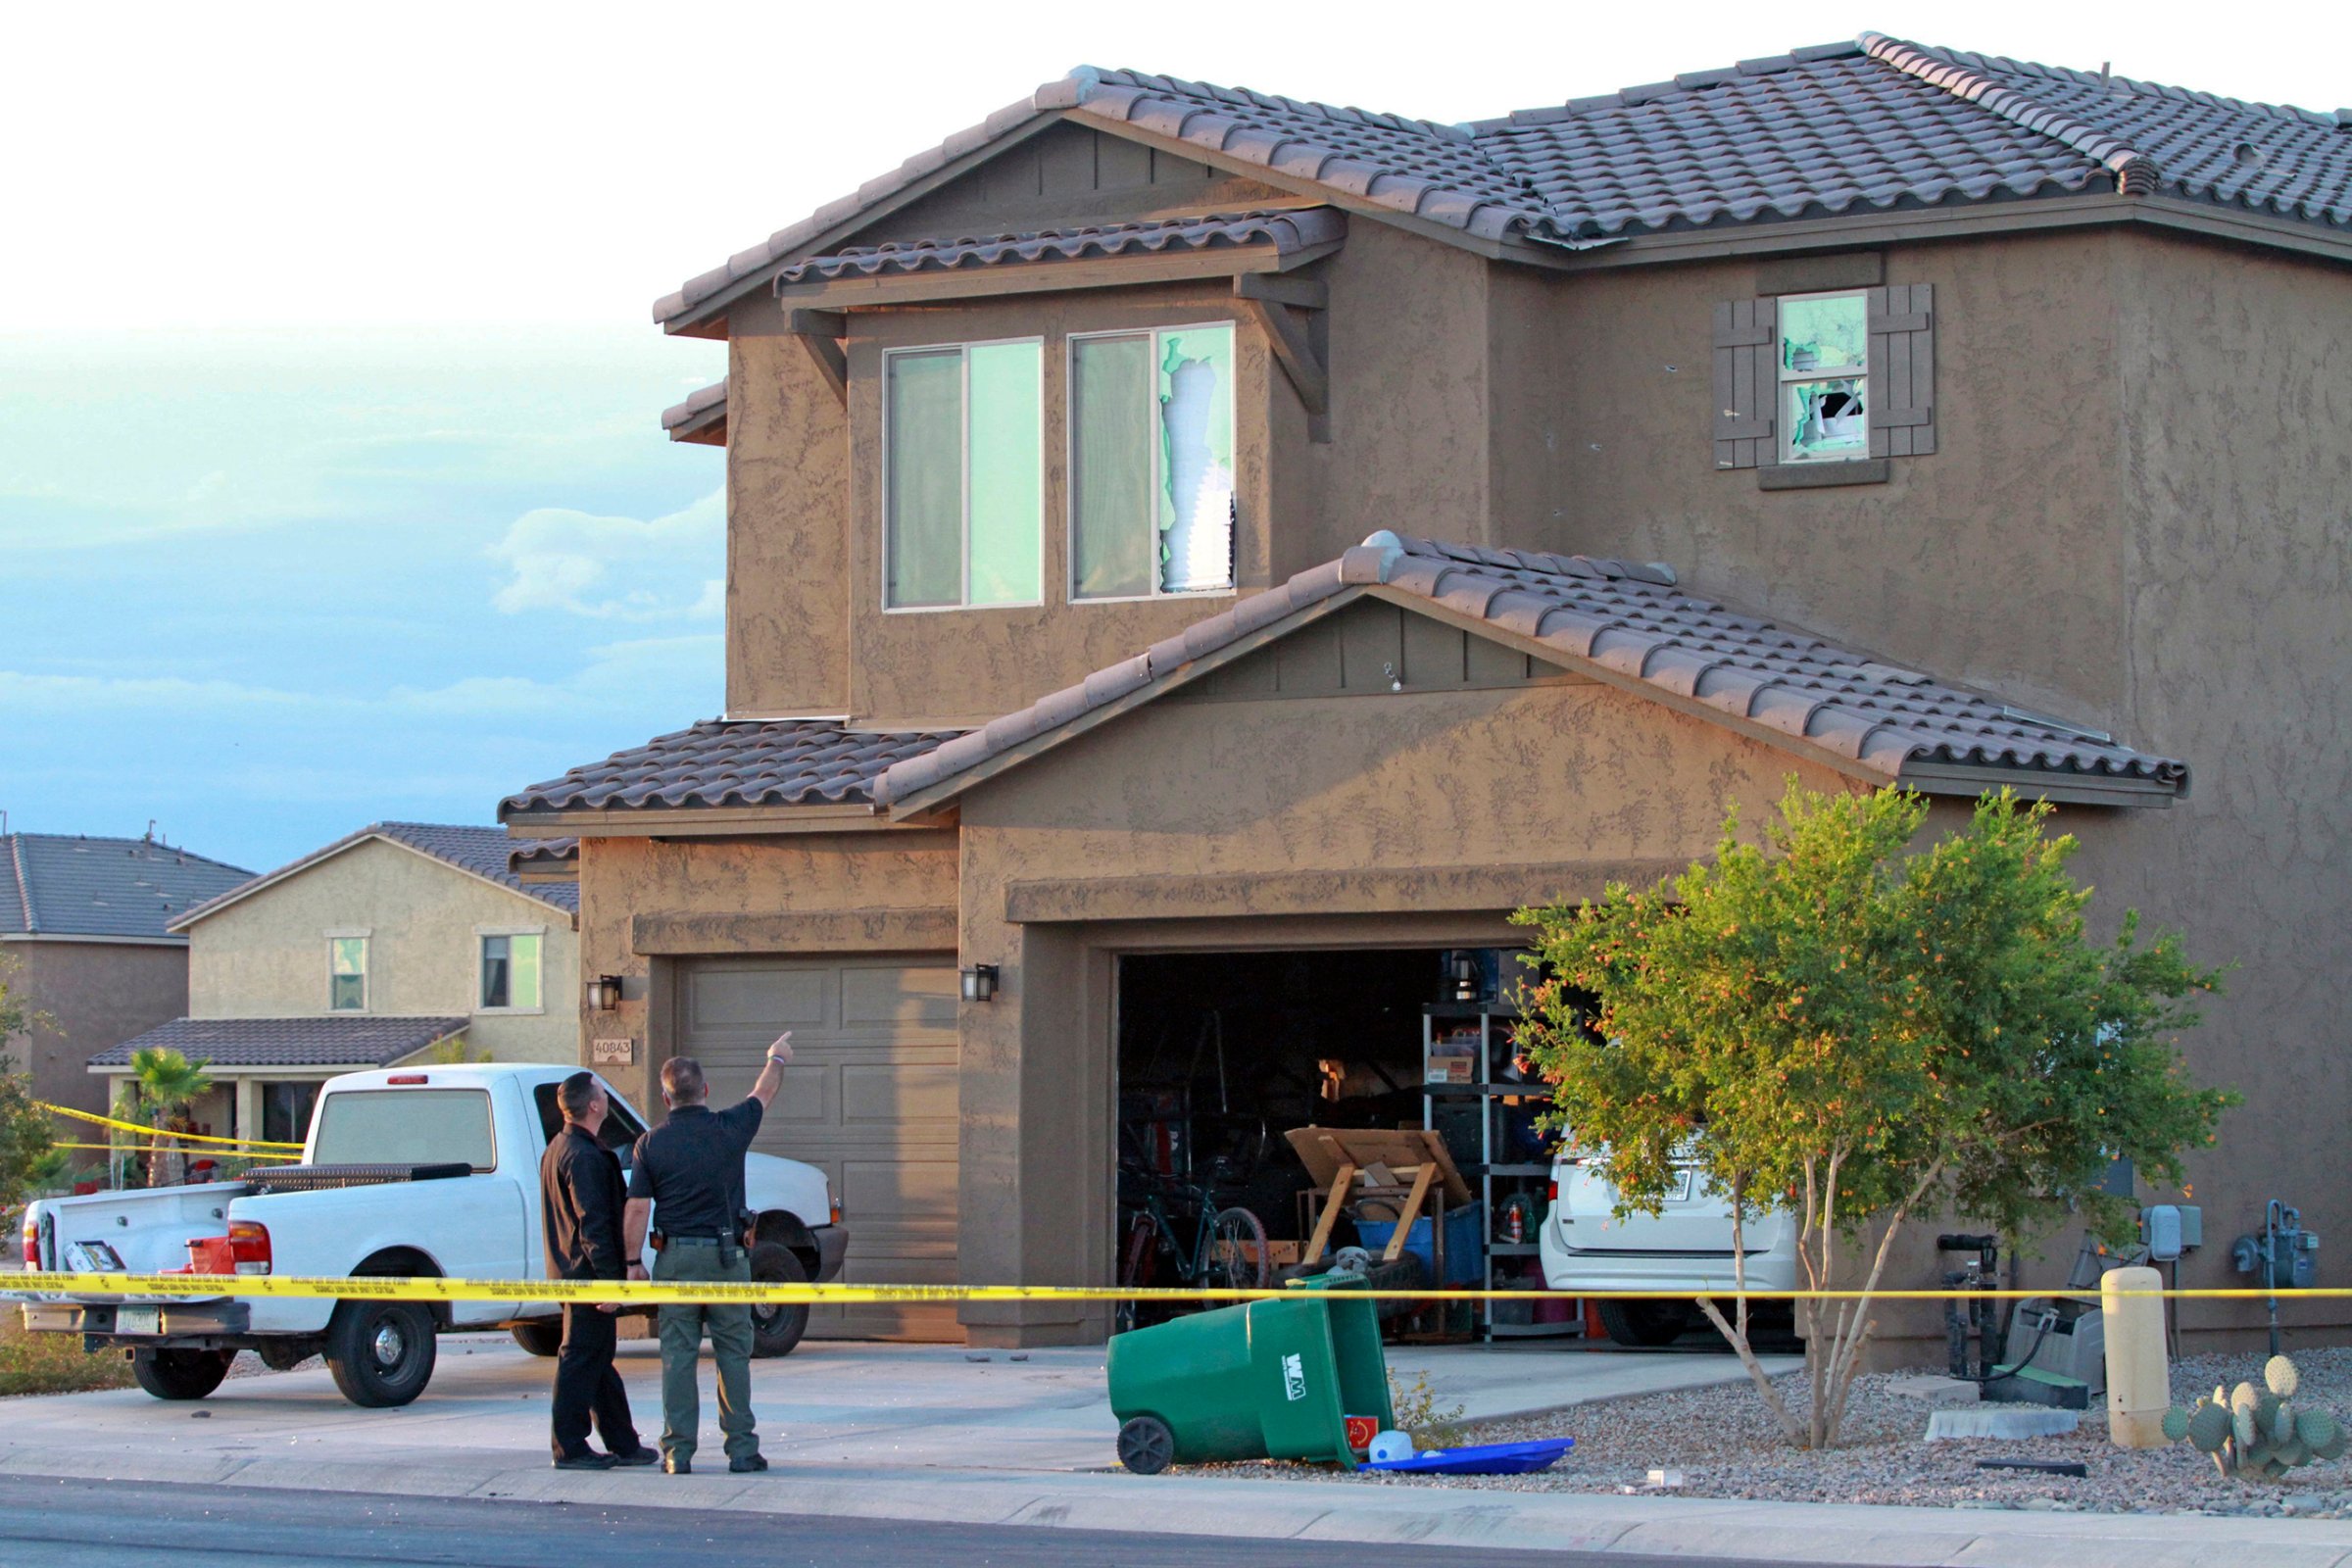 Police point to the window of a Maricopa home where a Border Patrol agent was found dead inside after exchanging gunfire with officers responding to a domestic violence call, Sept. 27, 2016.